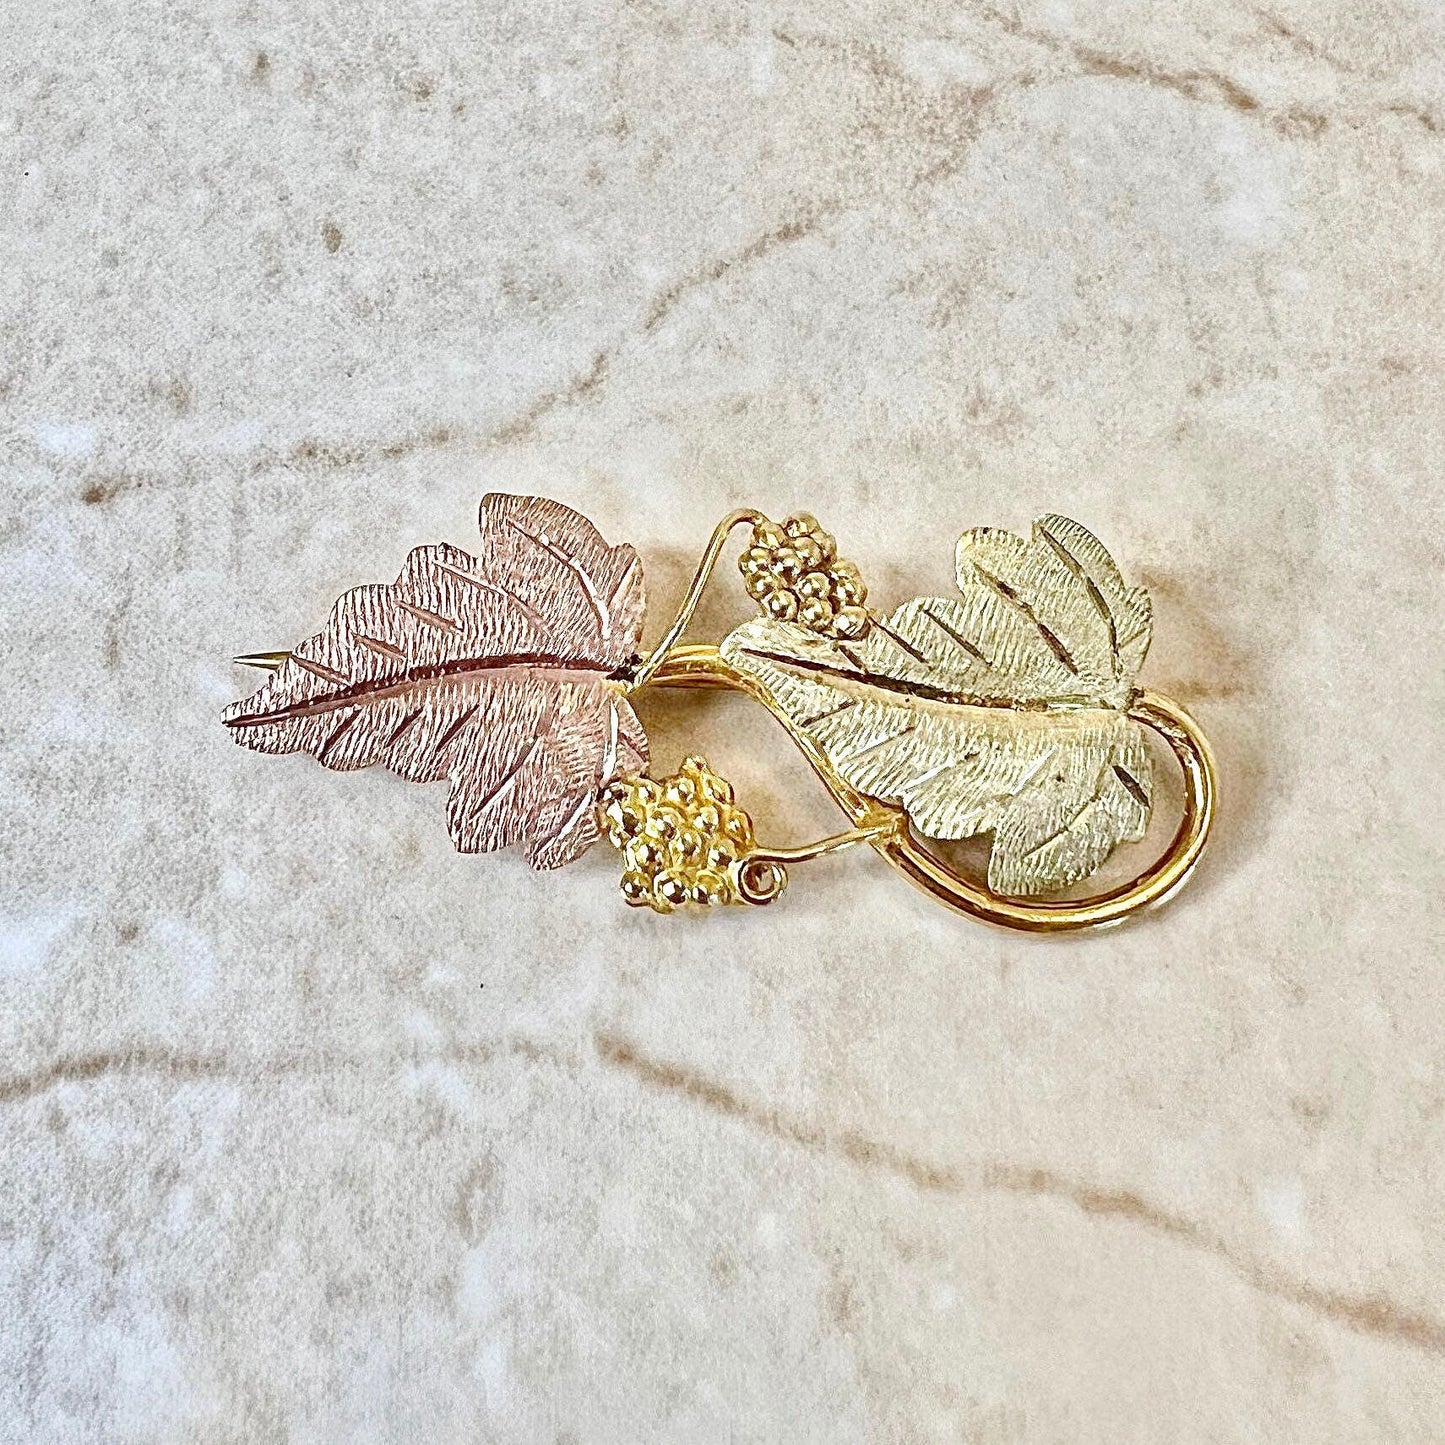 Vintage 10/12K Black Hills Gold Brooch Pin - Gold Grape Leaf Brooch - Birthday Gift - Jewelry Sale - Best Gift For Her